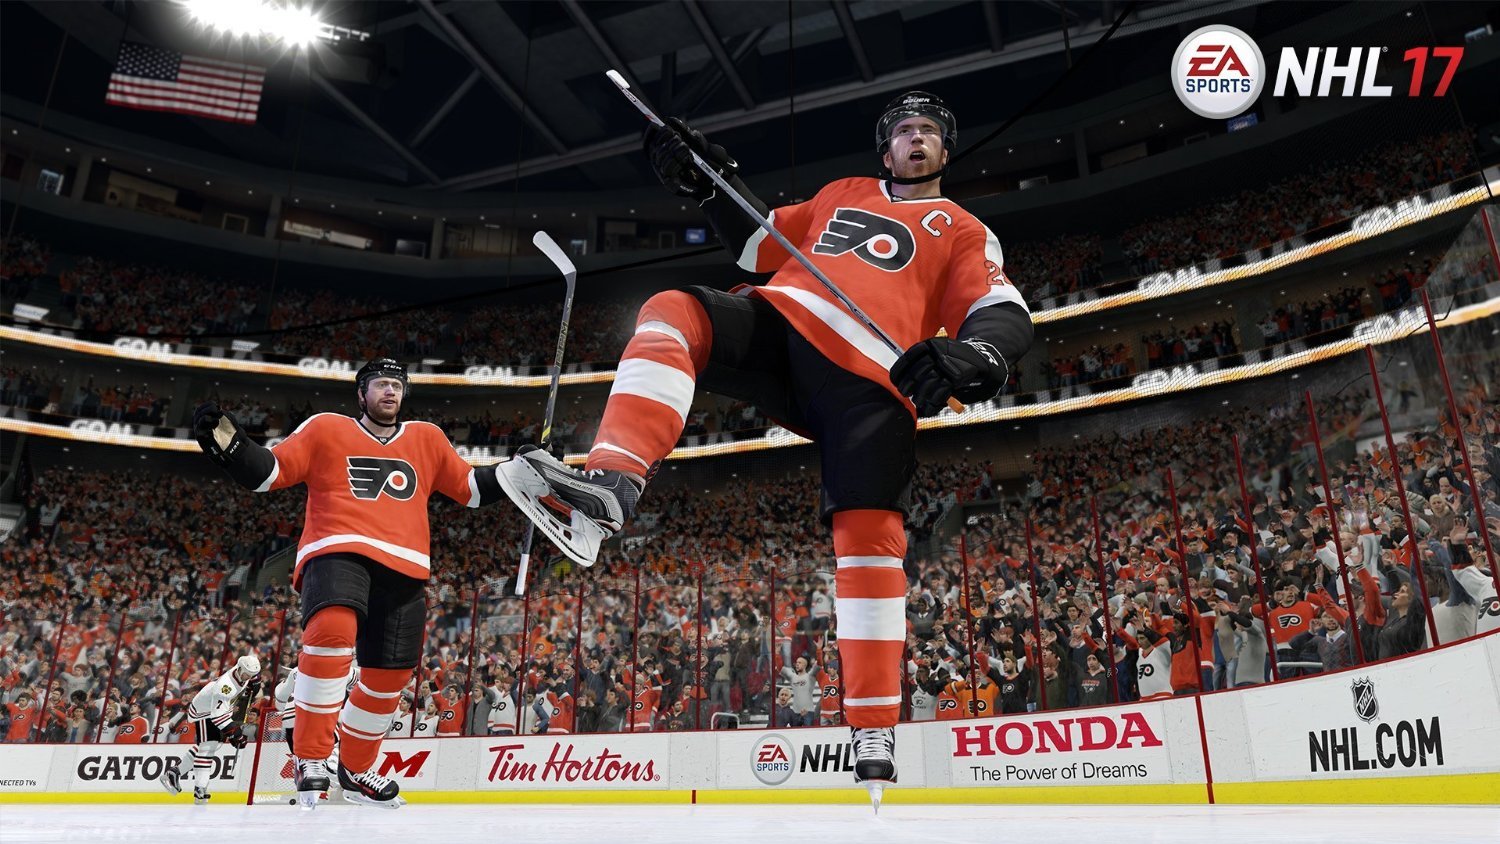 Nhl 17 (Xbox One) Review 5